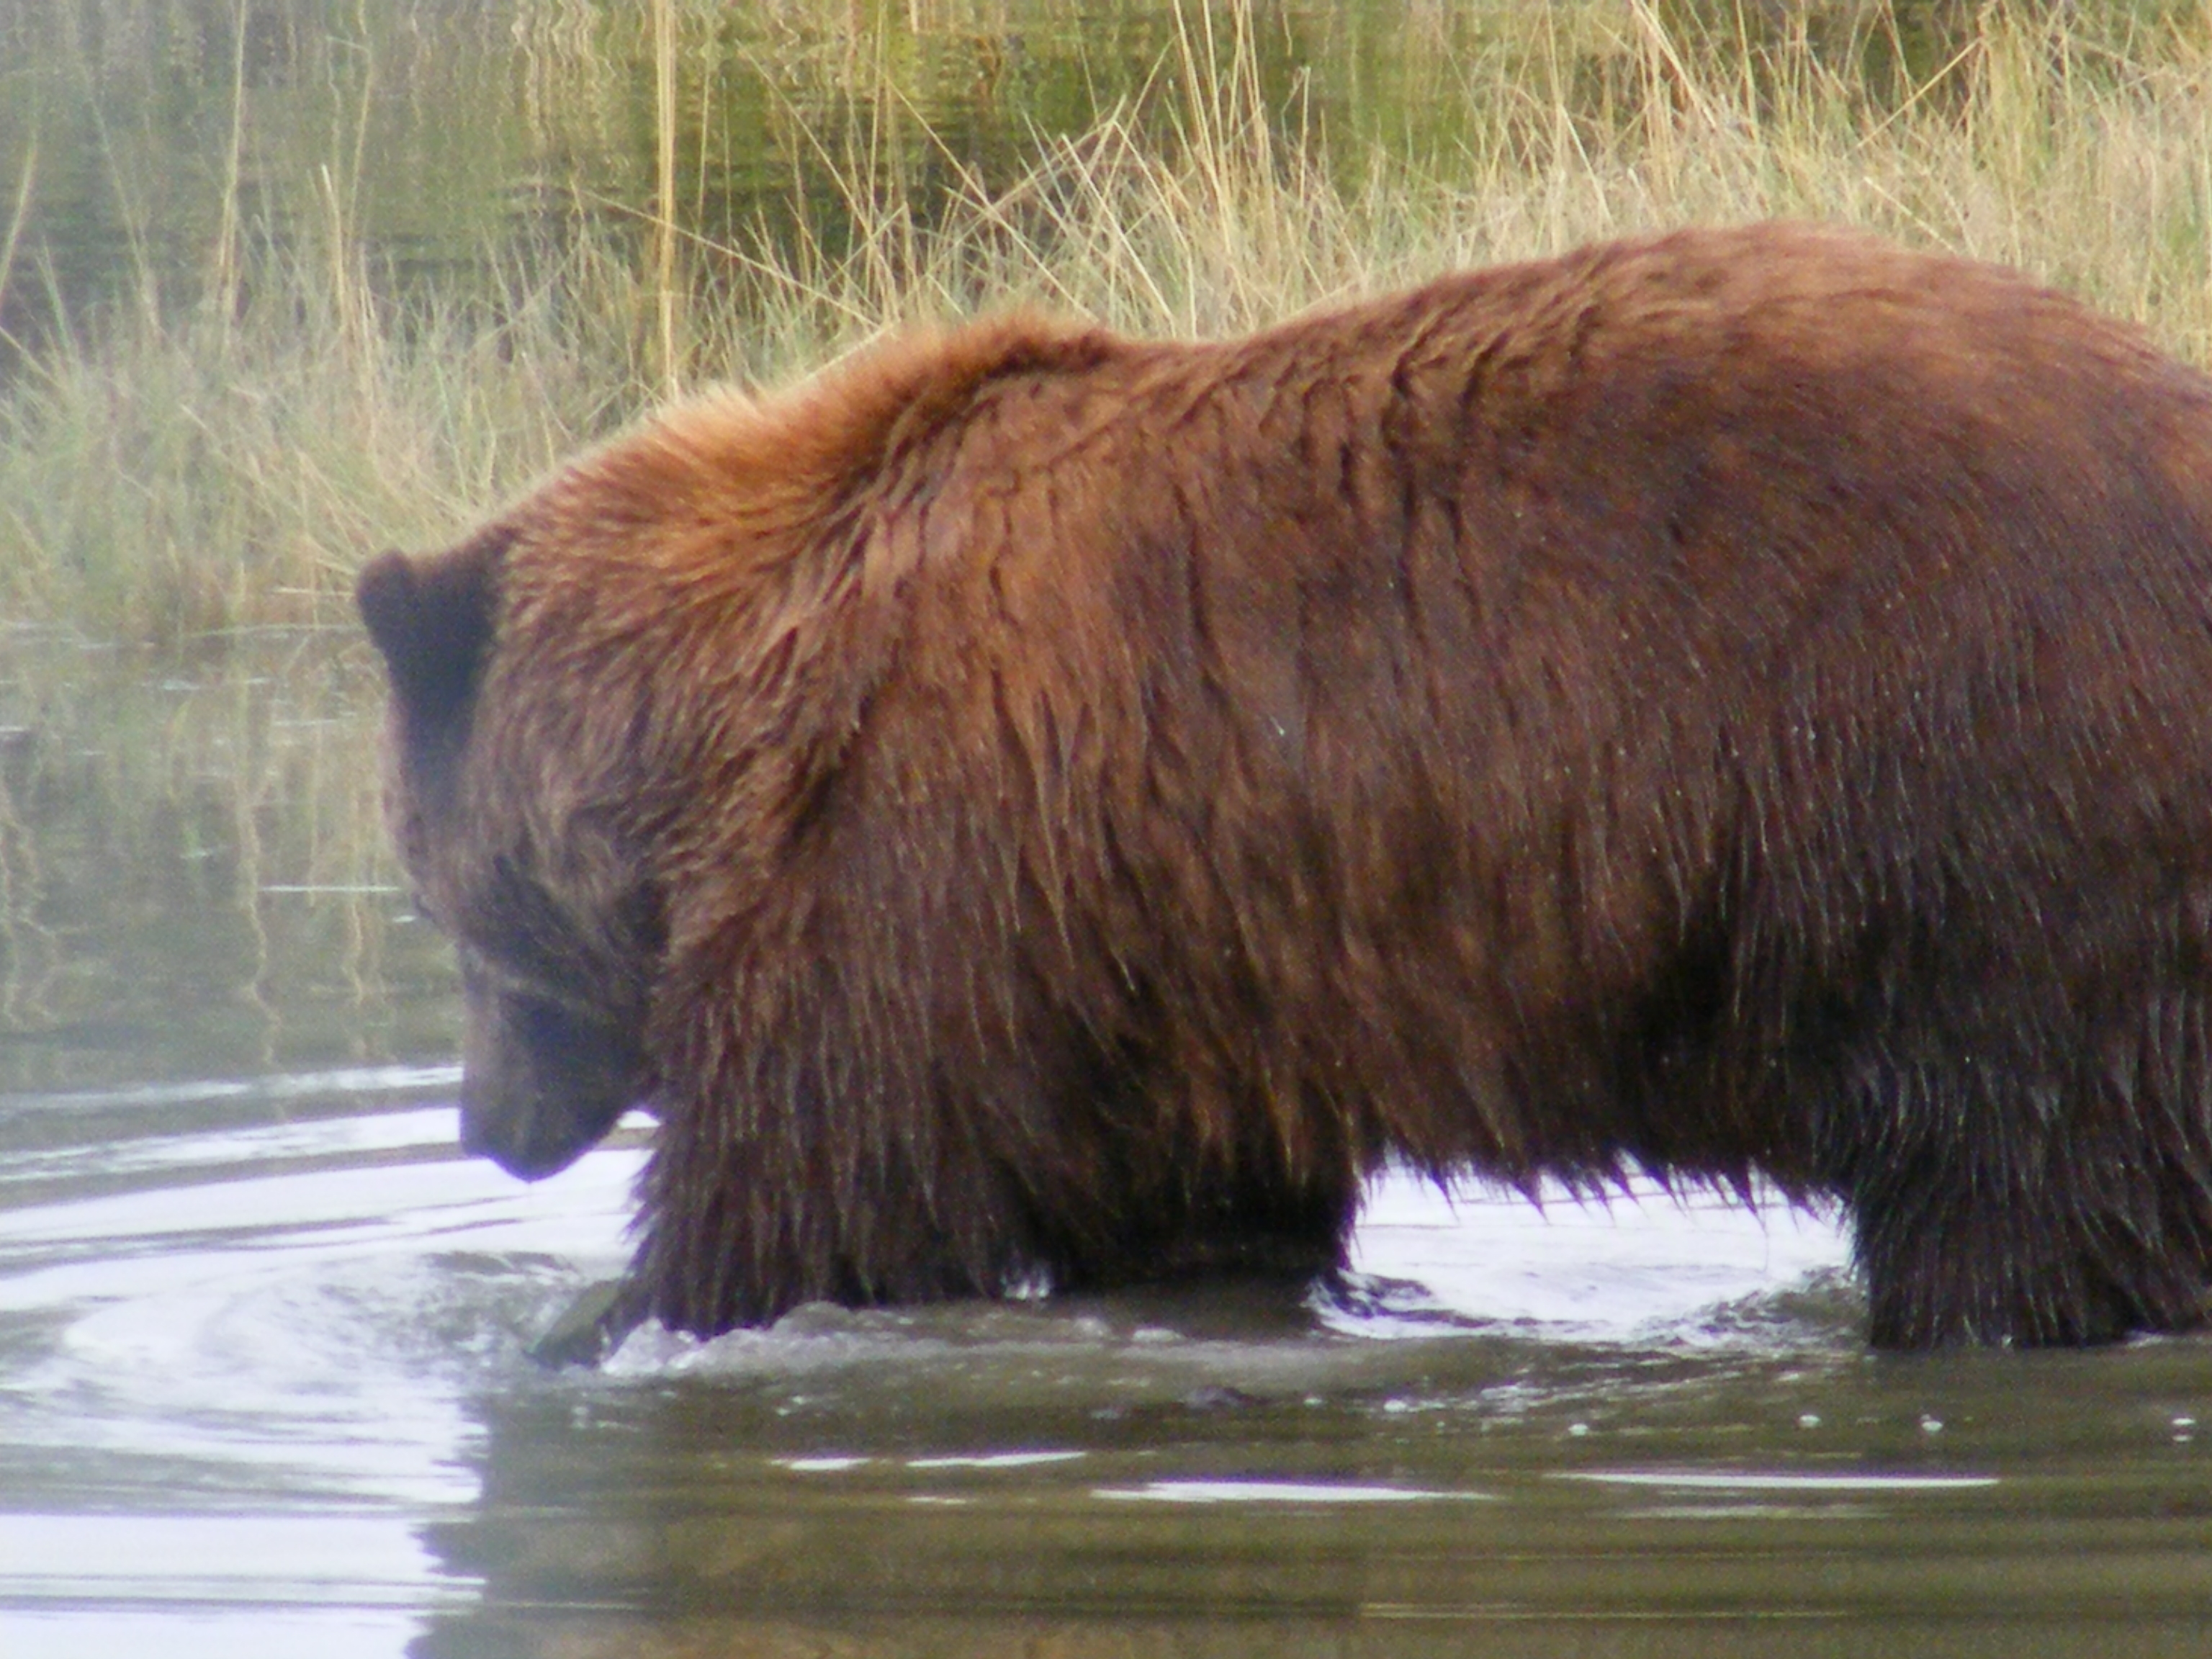 Brown Bears of AWCC Marker